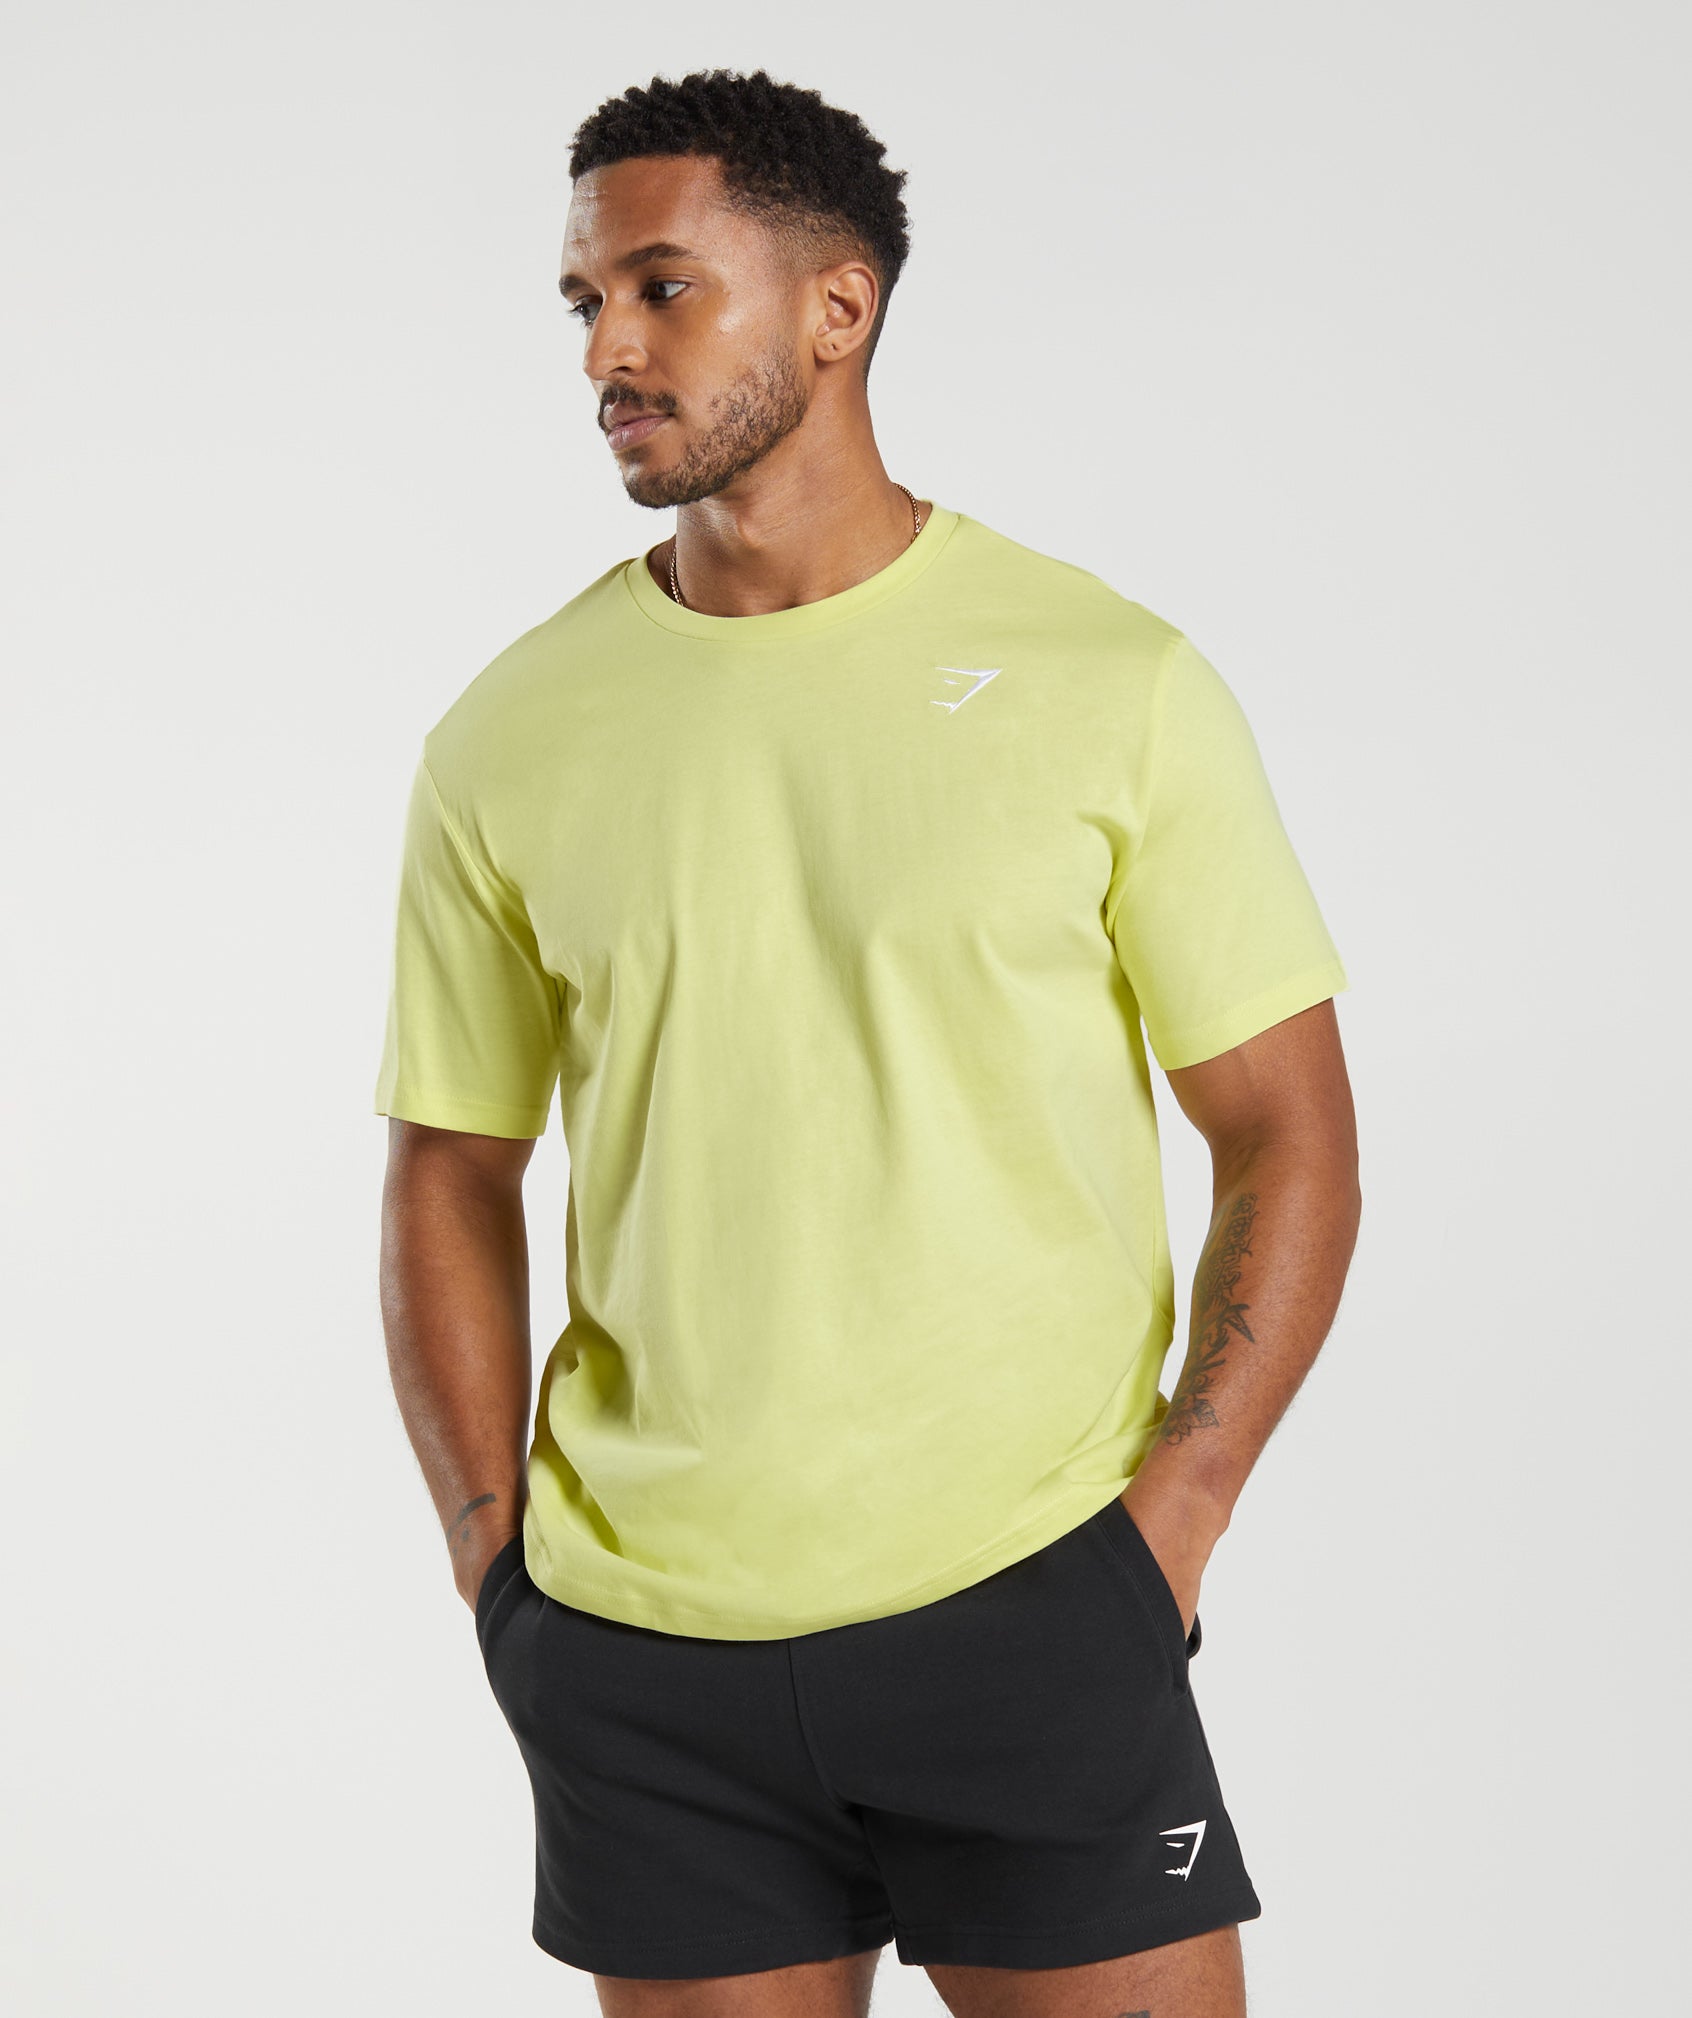 Crest T-Shirt in Firefly Green